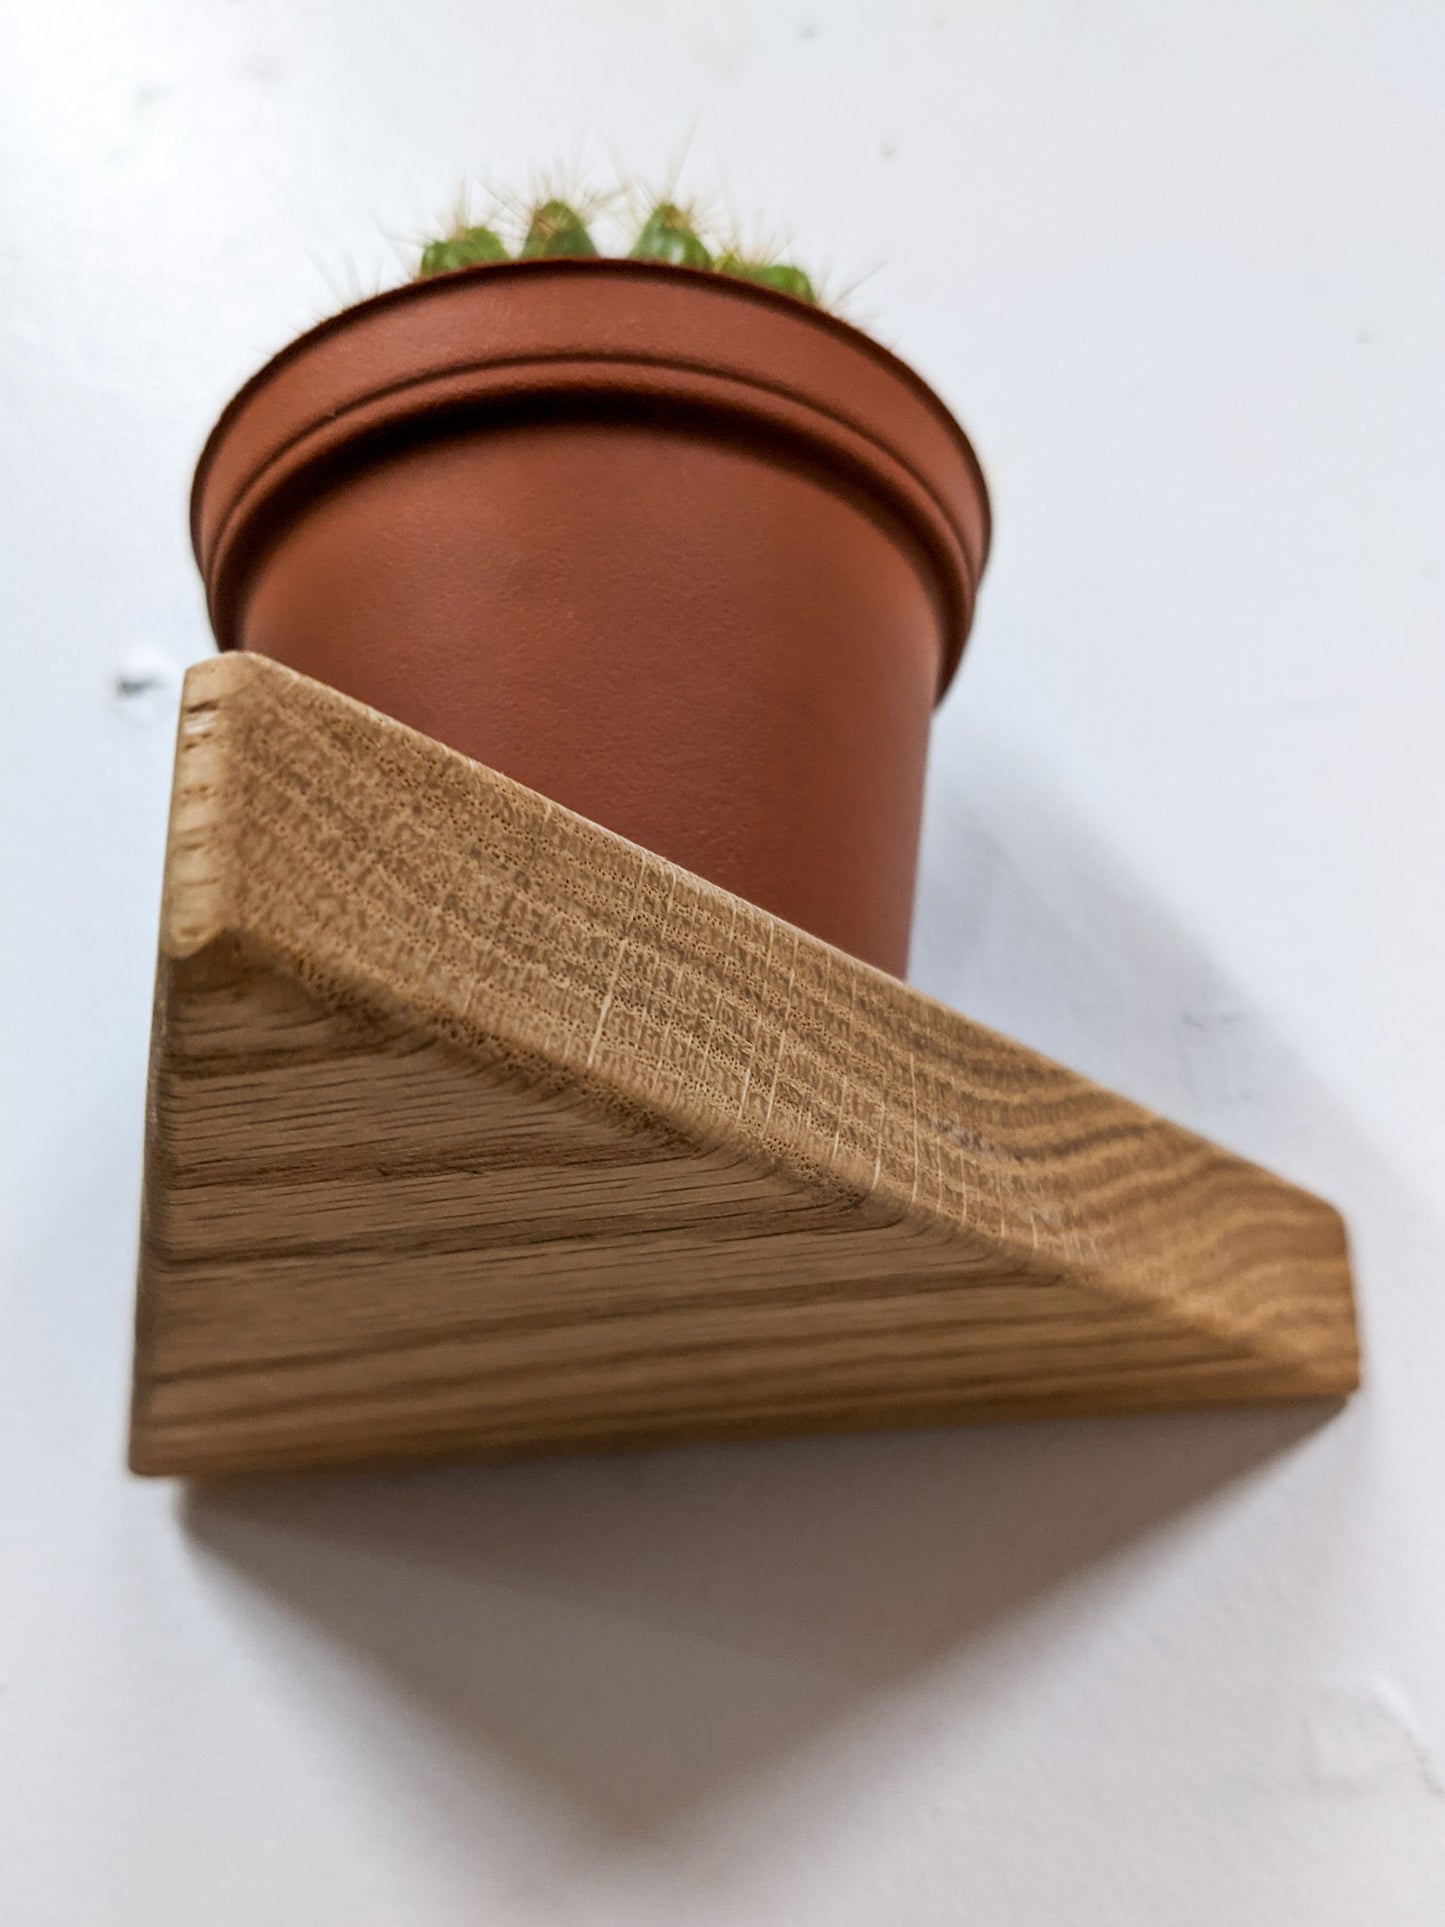 A bottom view of the triangle floating oak shelf, a terracotta colored planter sits on top.